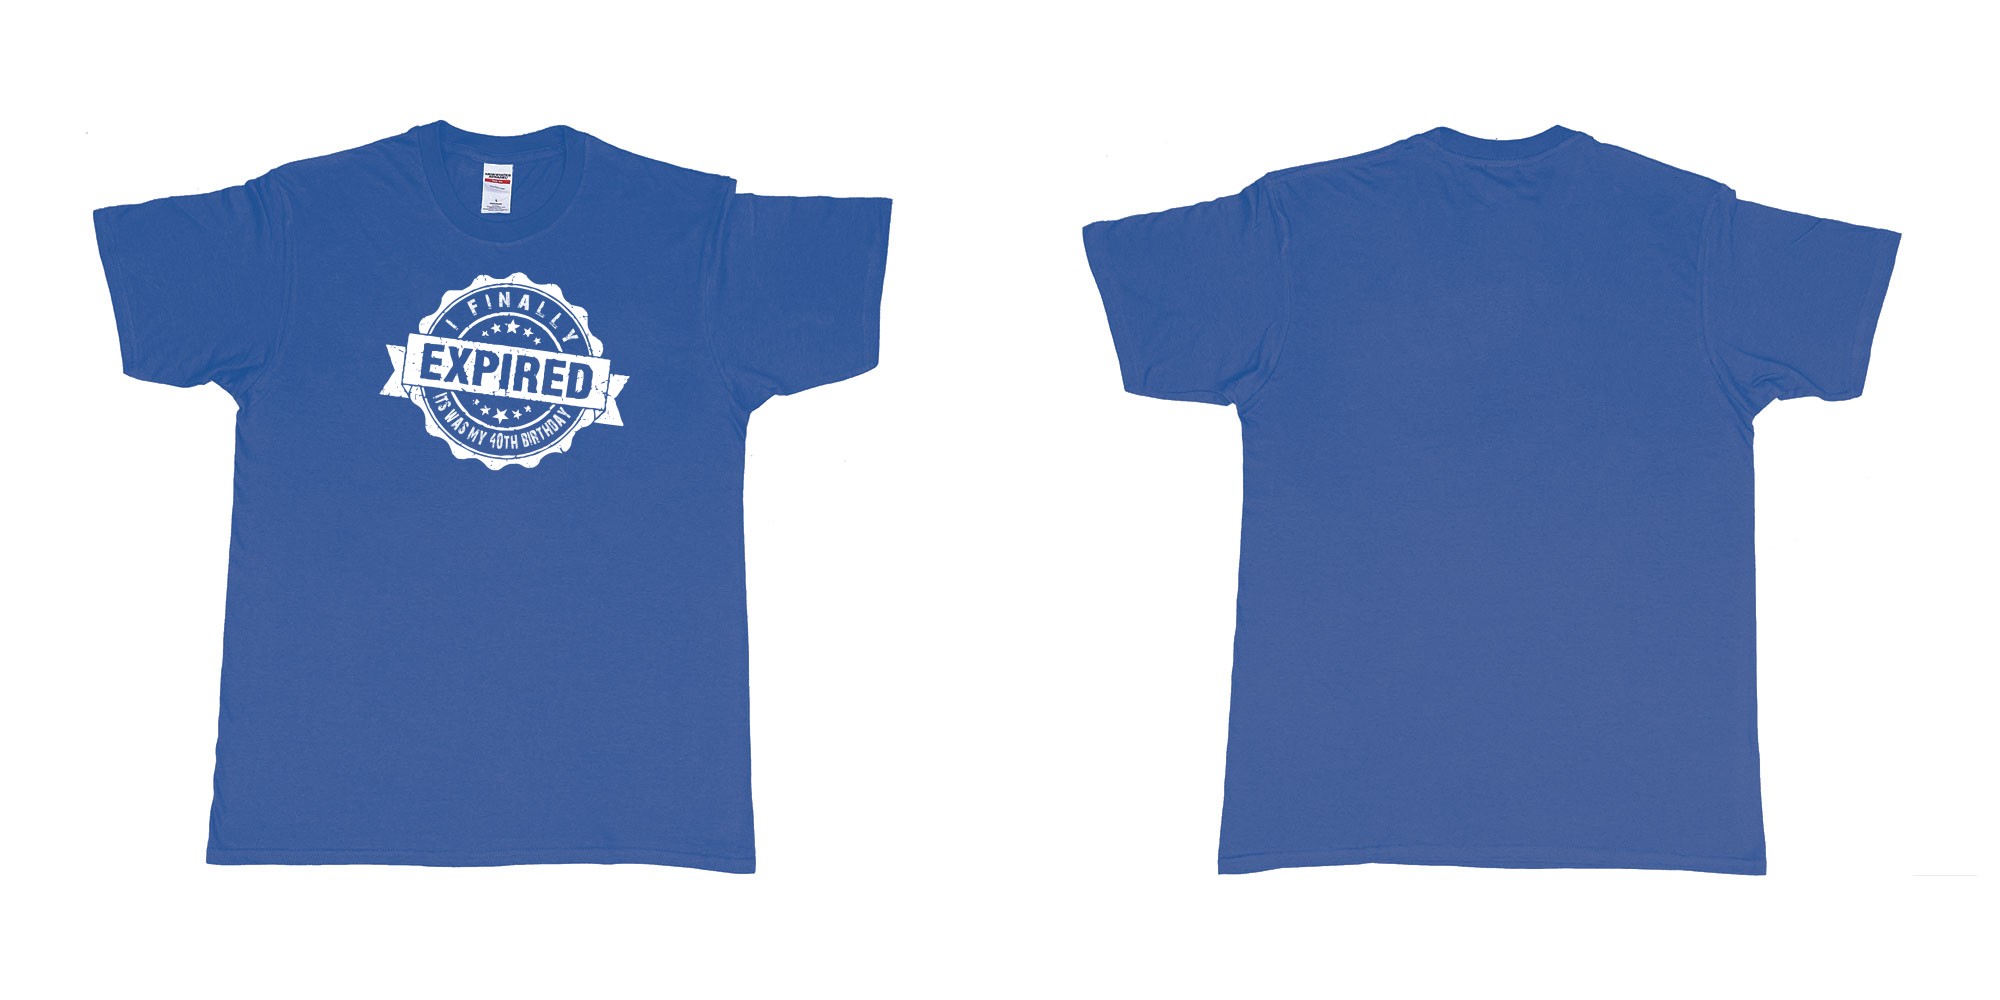 Custom tshirt design i finally expiered in fabric color royal-blue choice your own text made in Bali by The Pirate Way